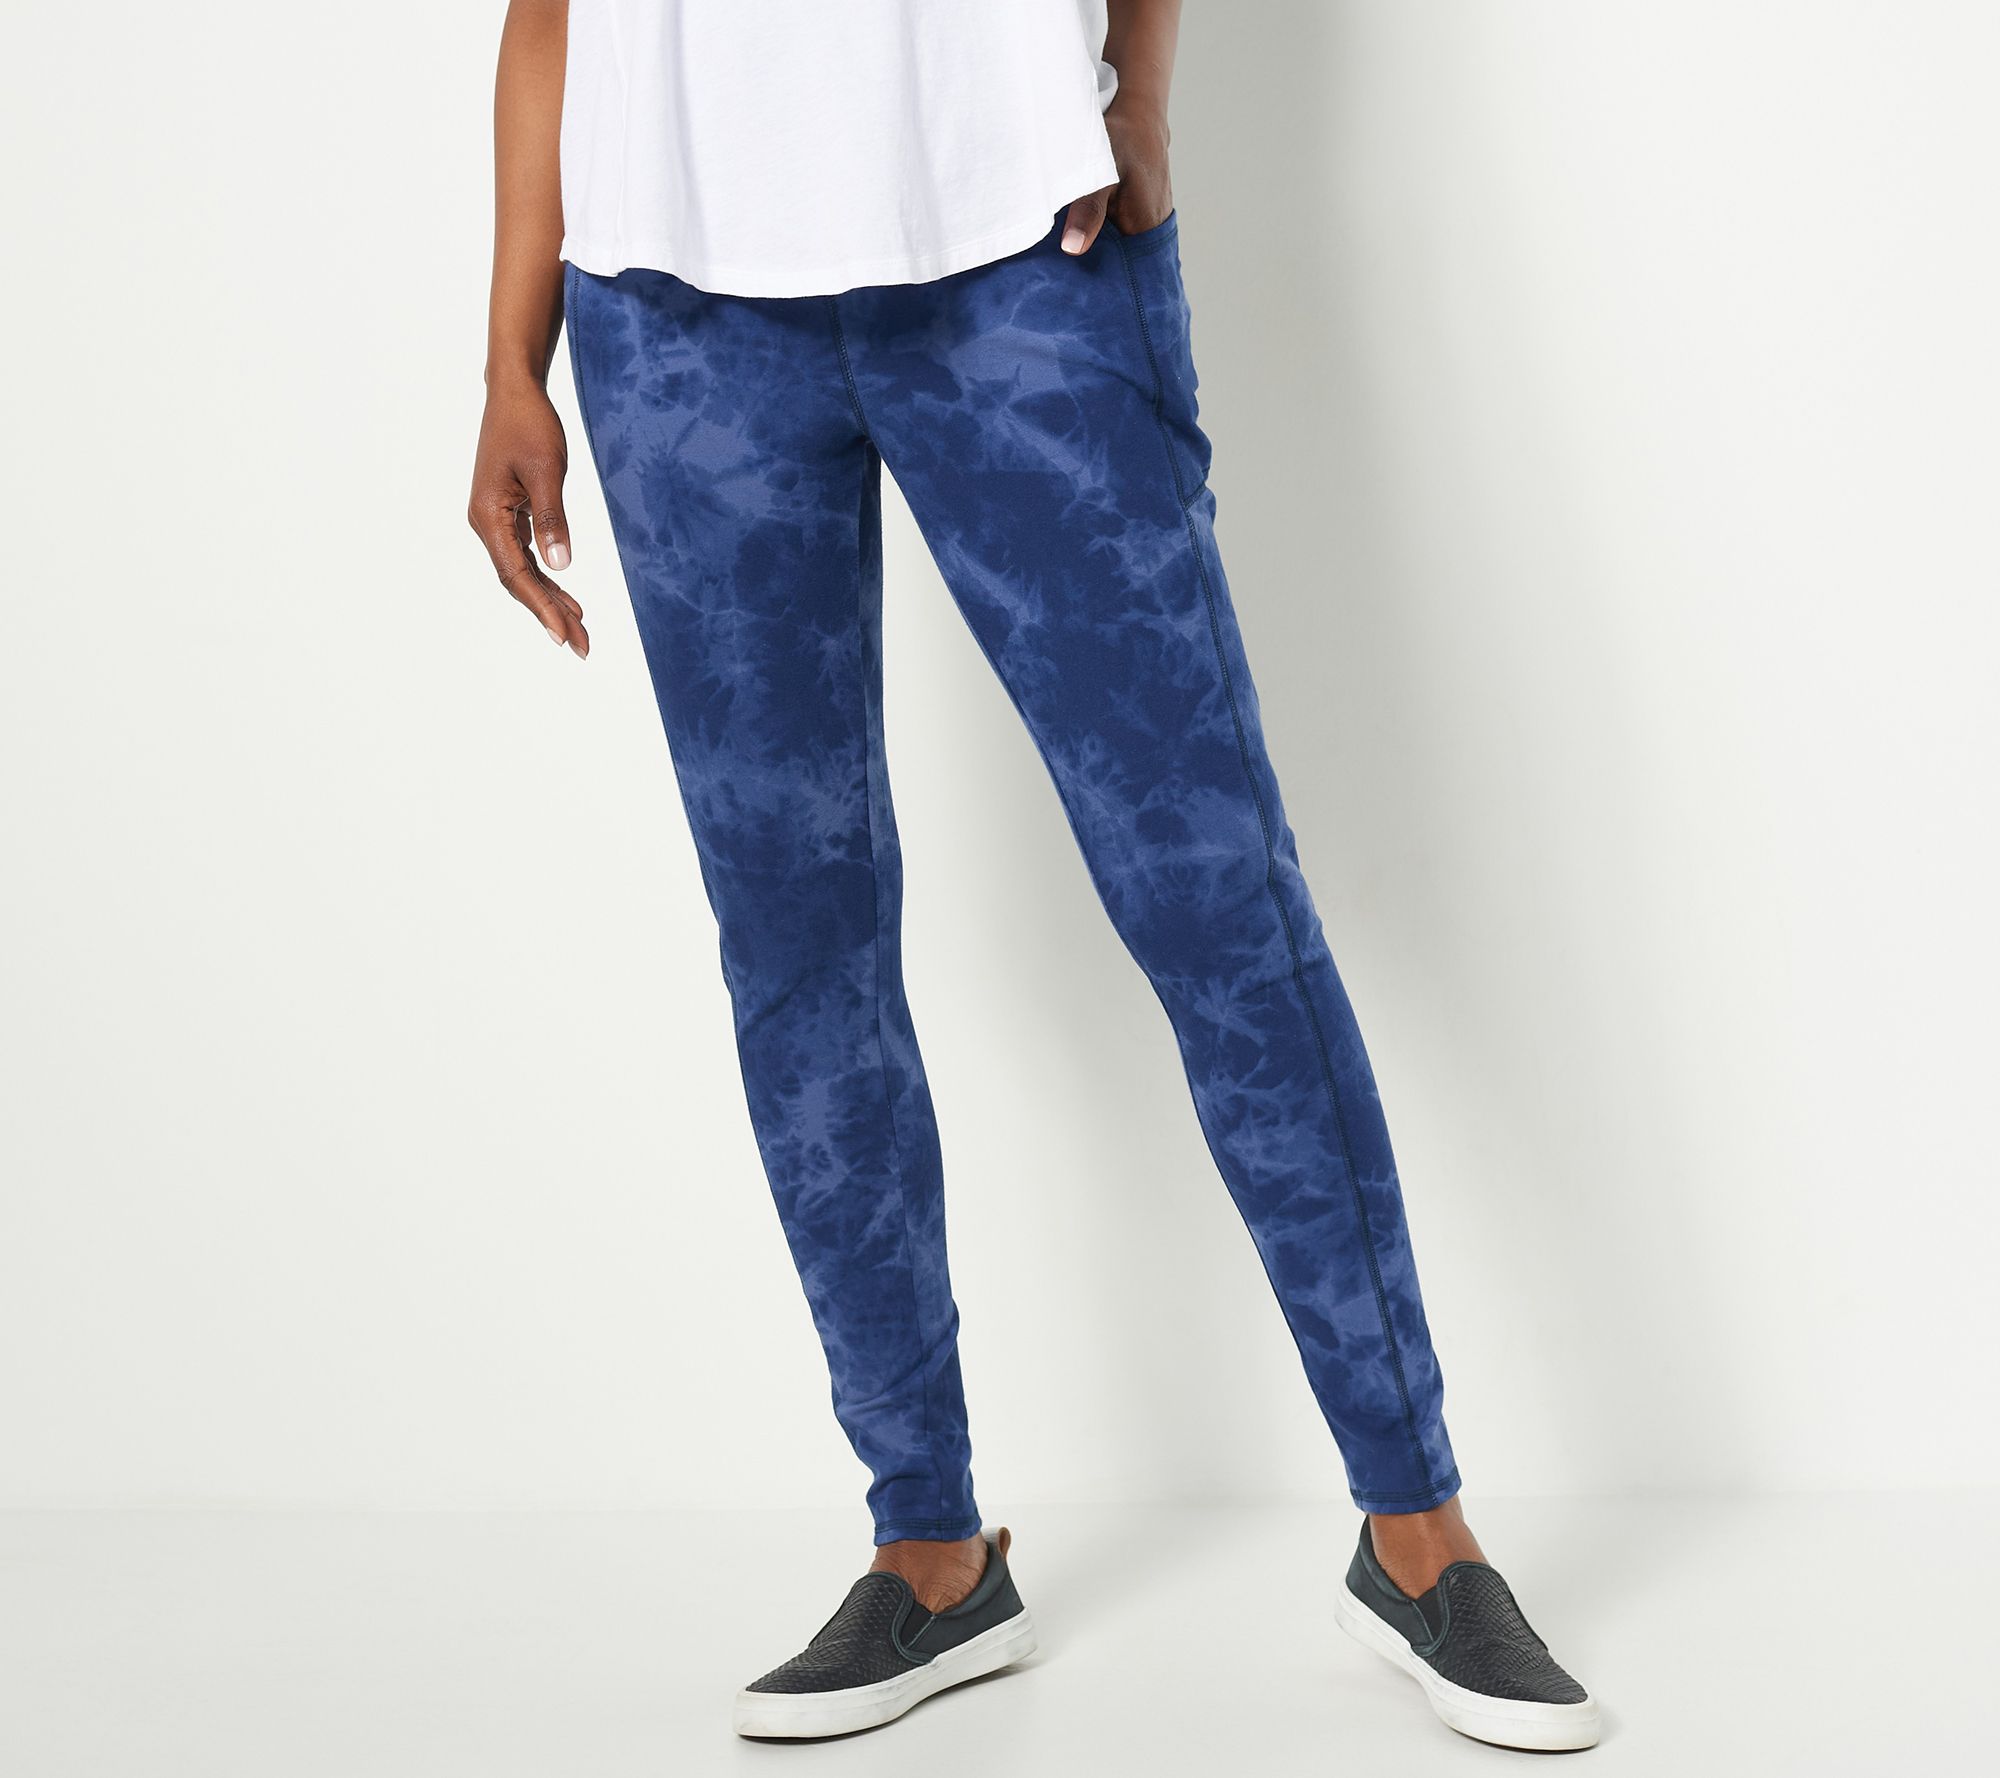 Denim & Co. Active Regular Duo Stretch Pant with Side Pocket 